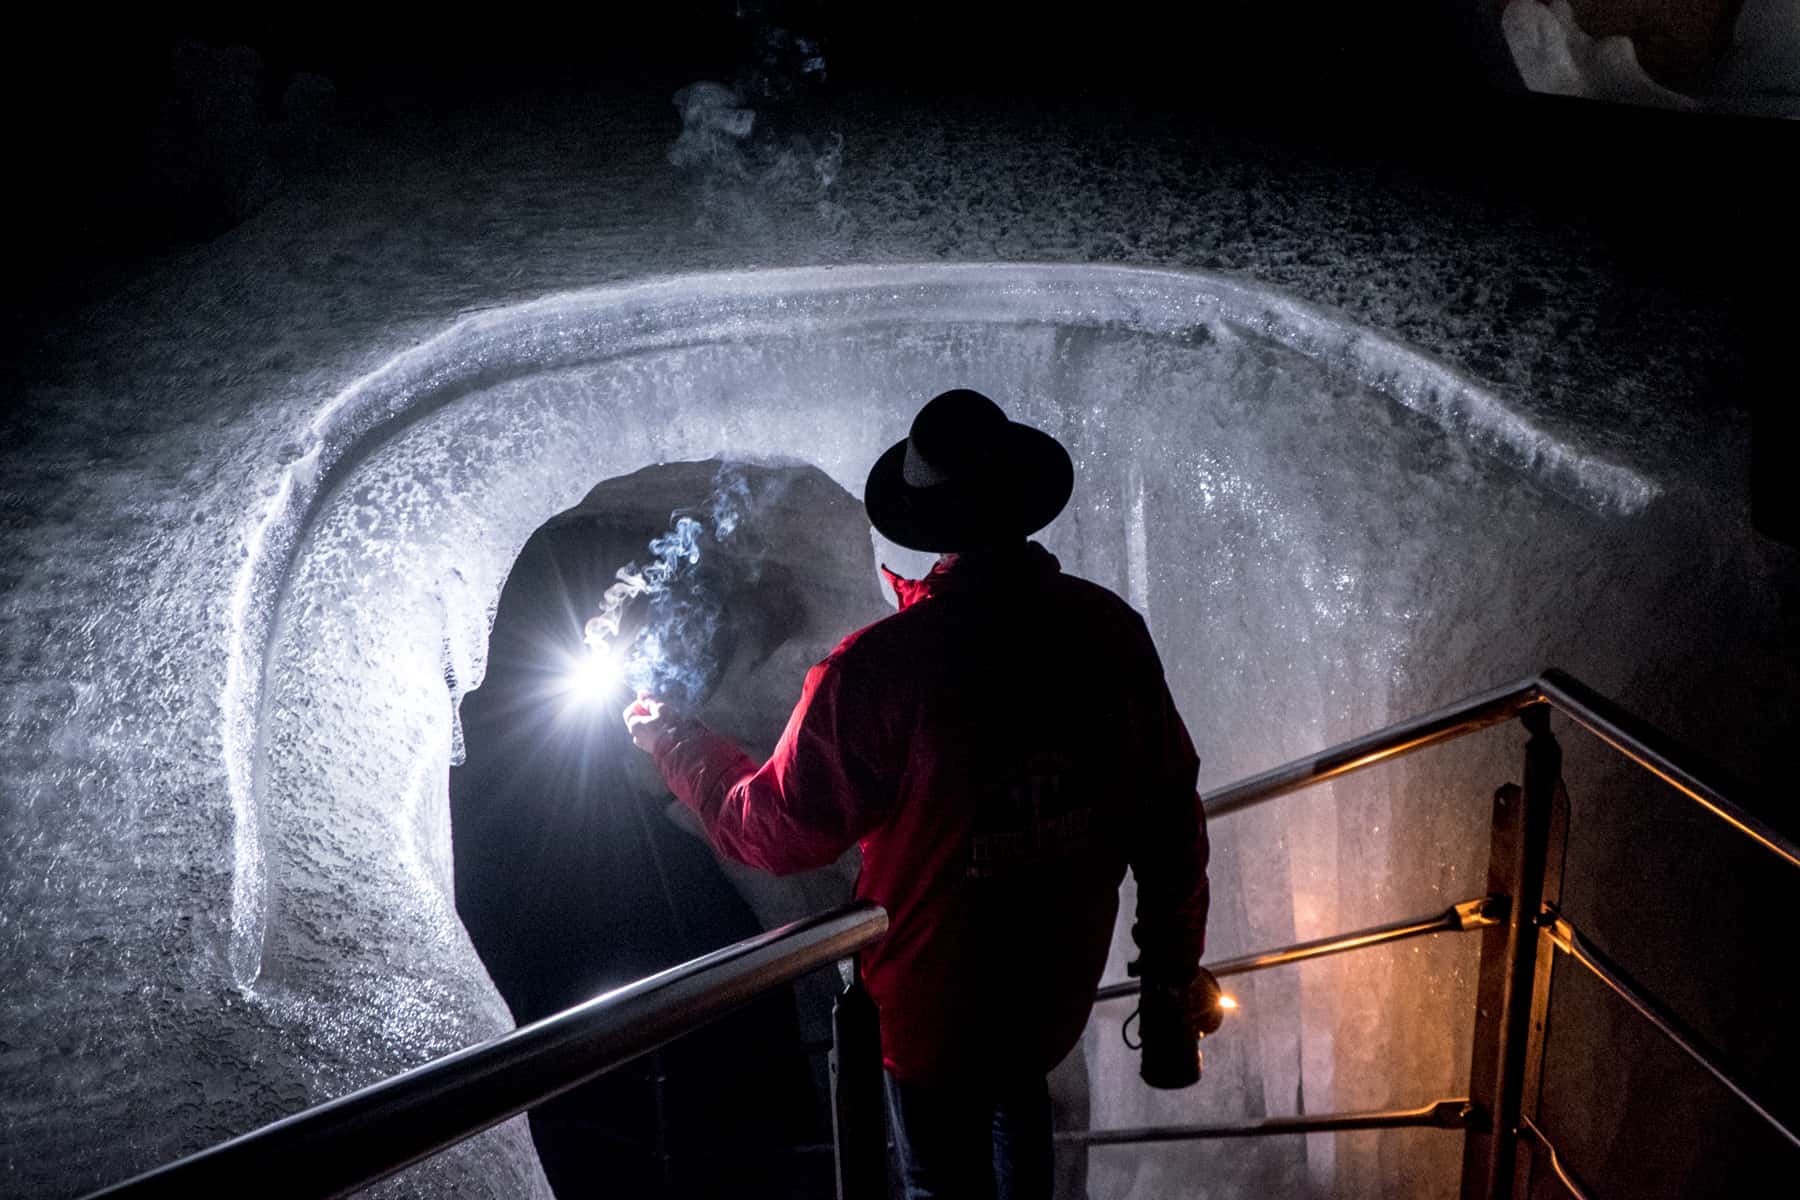 A man in a red jacket and black hat hots a light sparkler as he beings his entry into a tunnel of ice at Eisriesenwelt, Austria